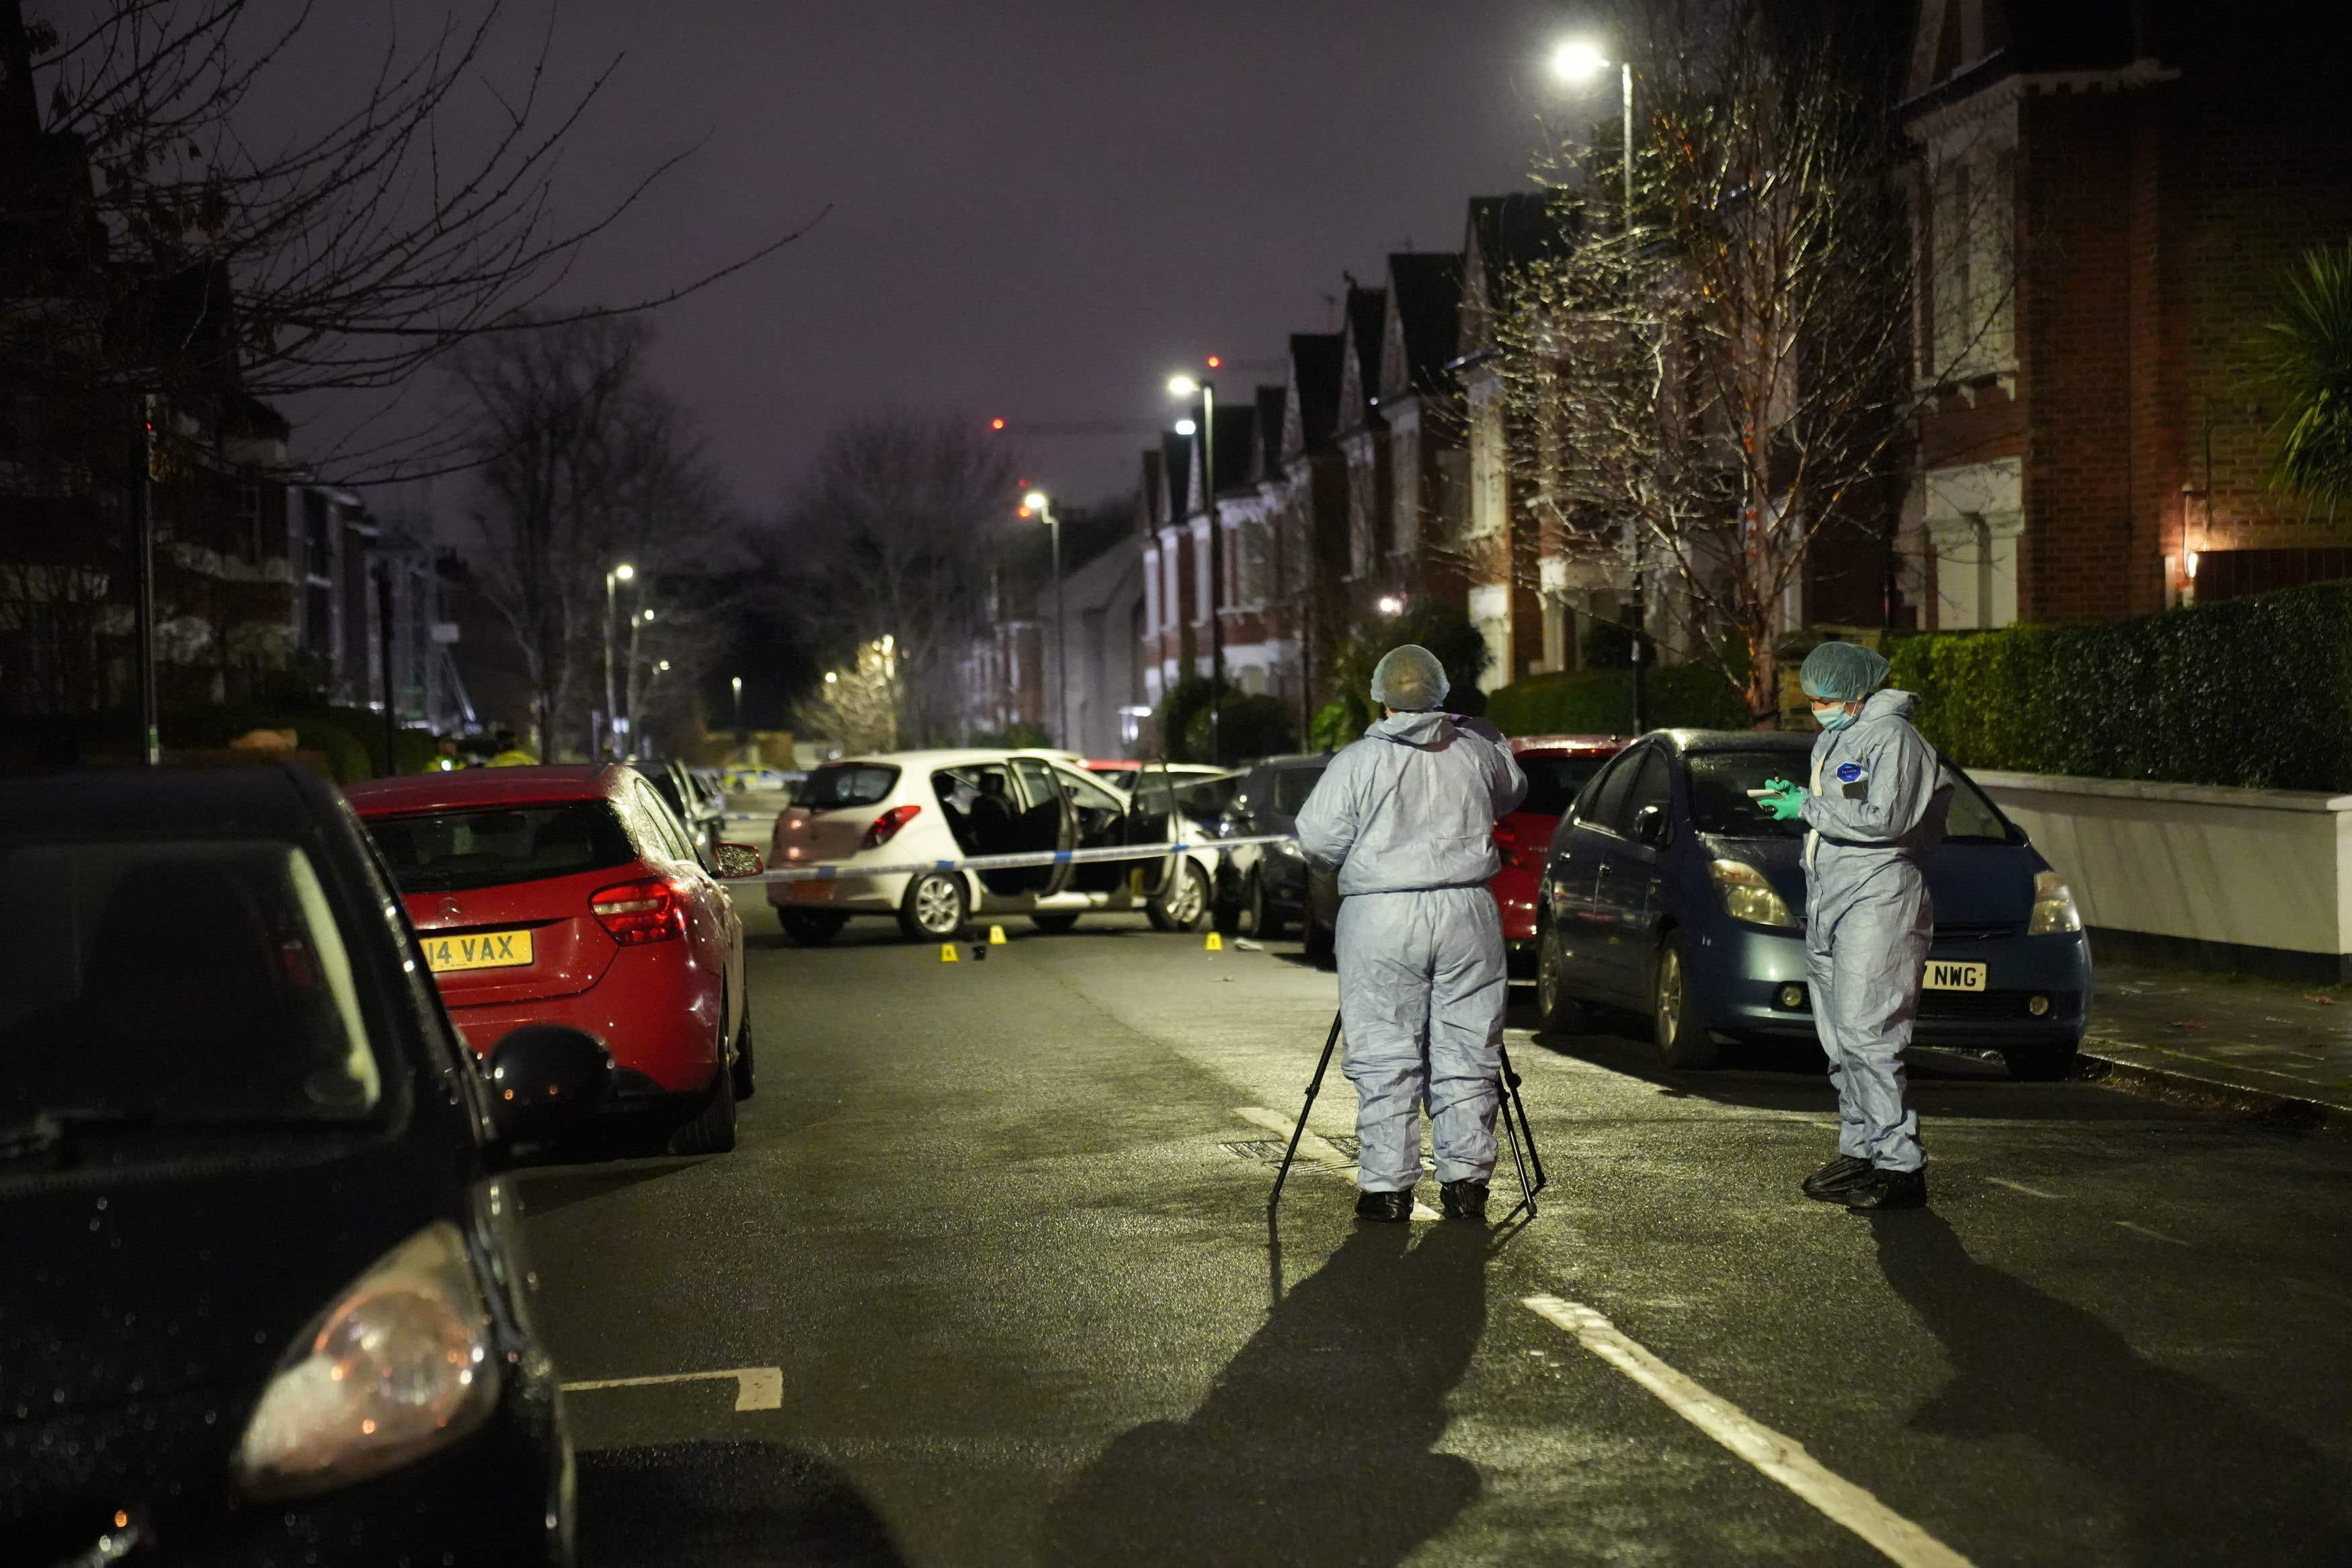 Police investigate the scene of an incident near Clapham Common, south London